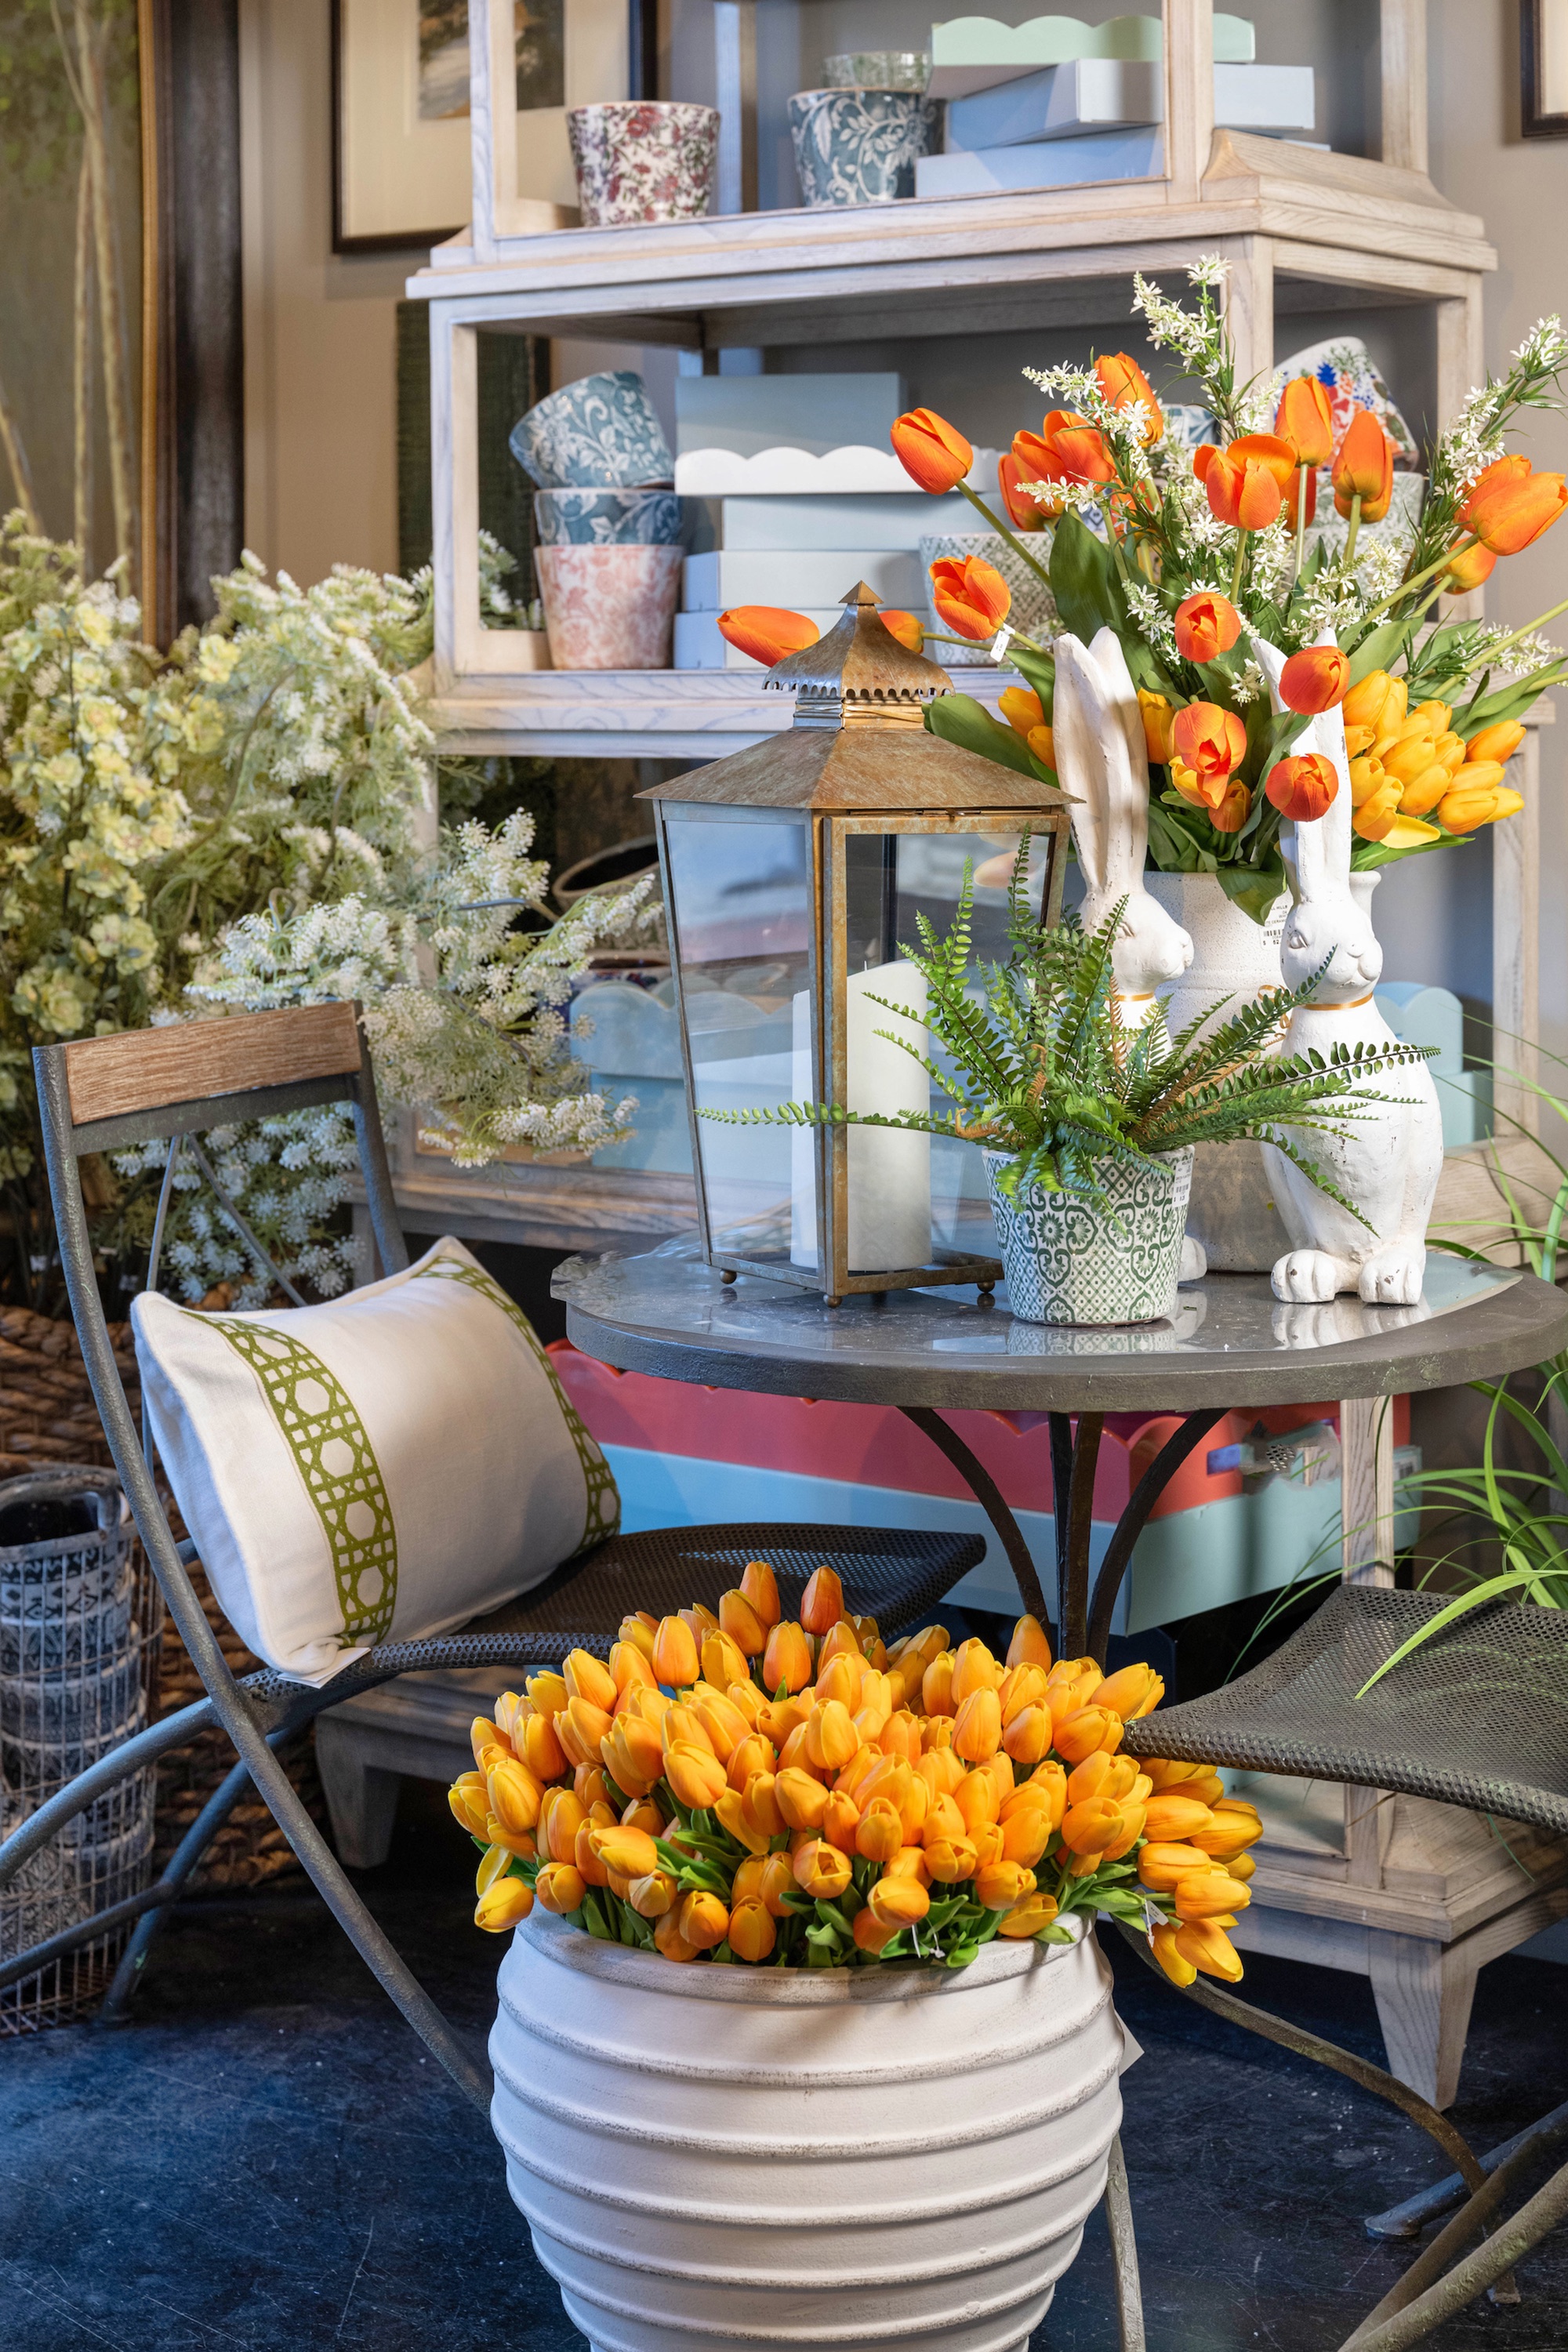 With their simple beauty and versatility, tulips are a must-have for any spring decor.